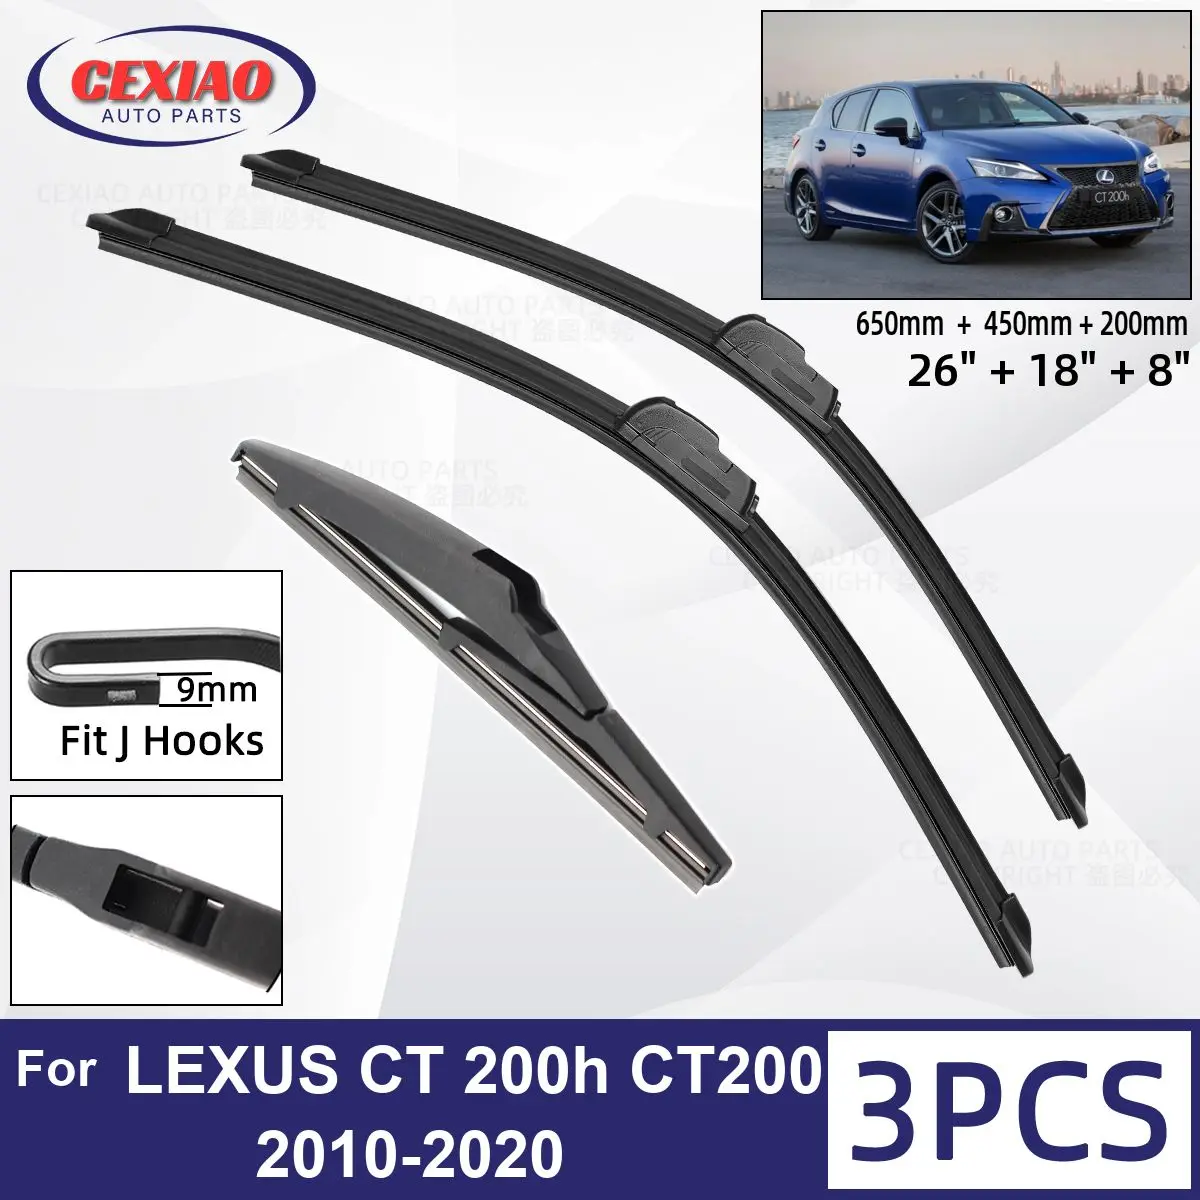 

For LEXUS CT 200h CT200h 2010 - 2020 Car Front Rear Wiper Blades Soft Rubber Windscreen Wipers Auto Windshield 26"+18"+8"